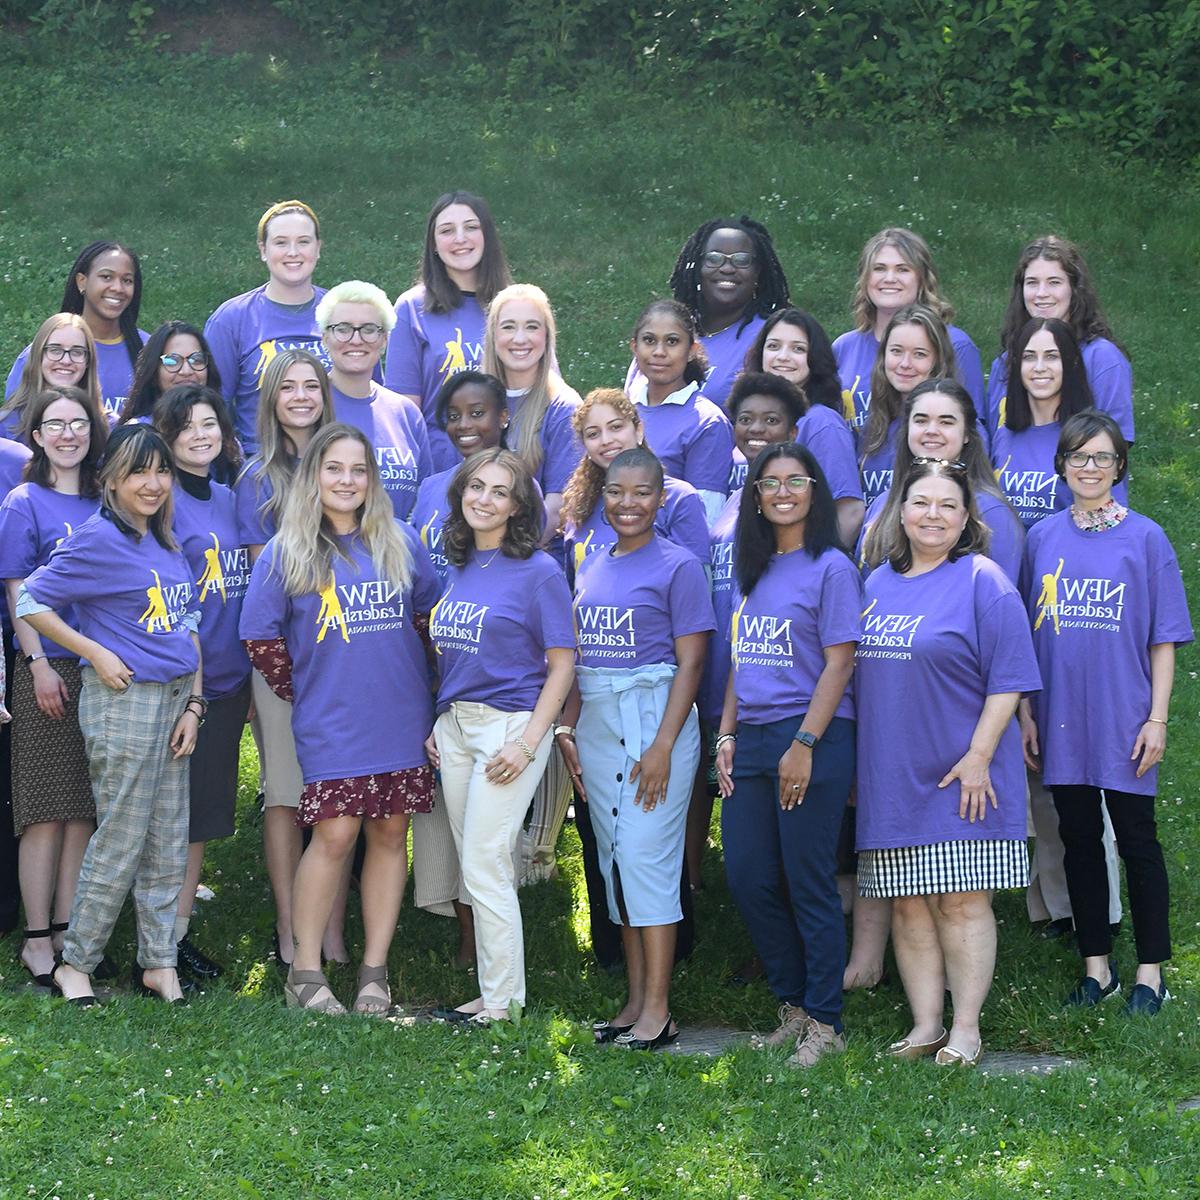 Photo of a group of women in purple NEW Leadership t-shirts posing for a photo outside